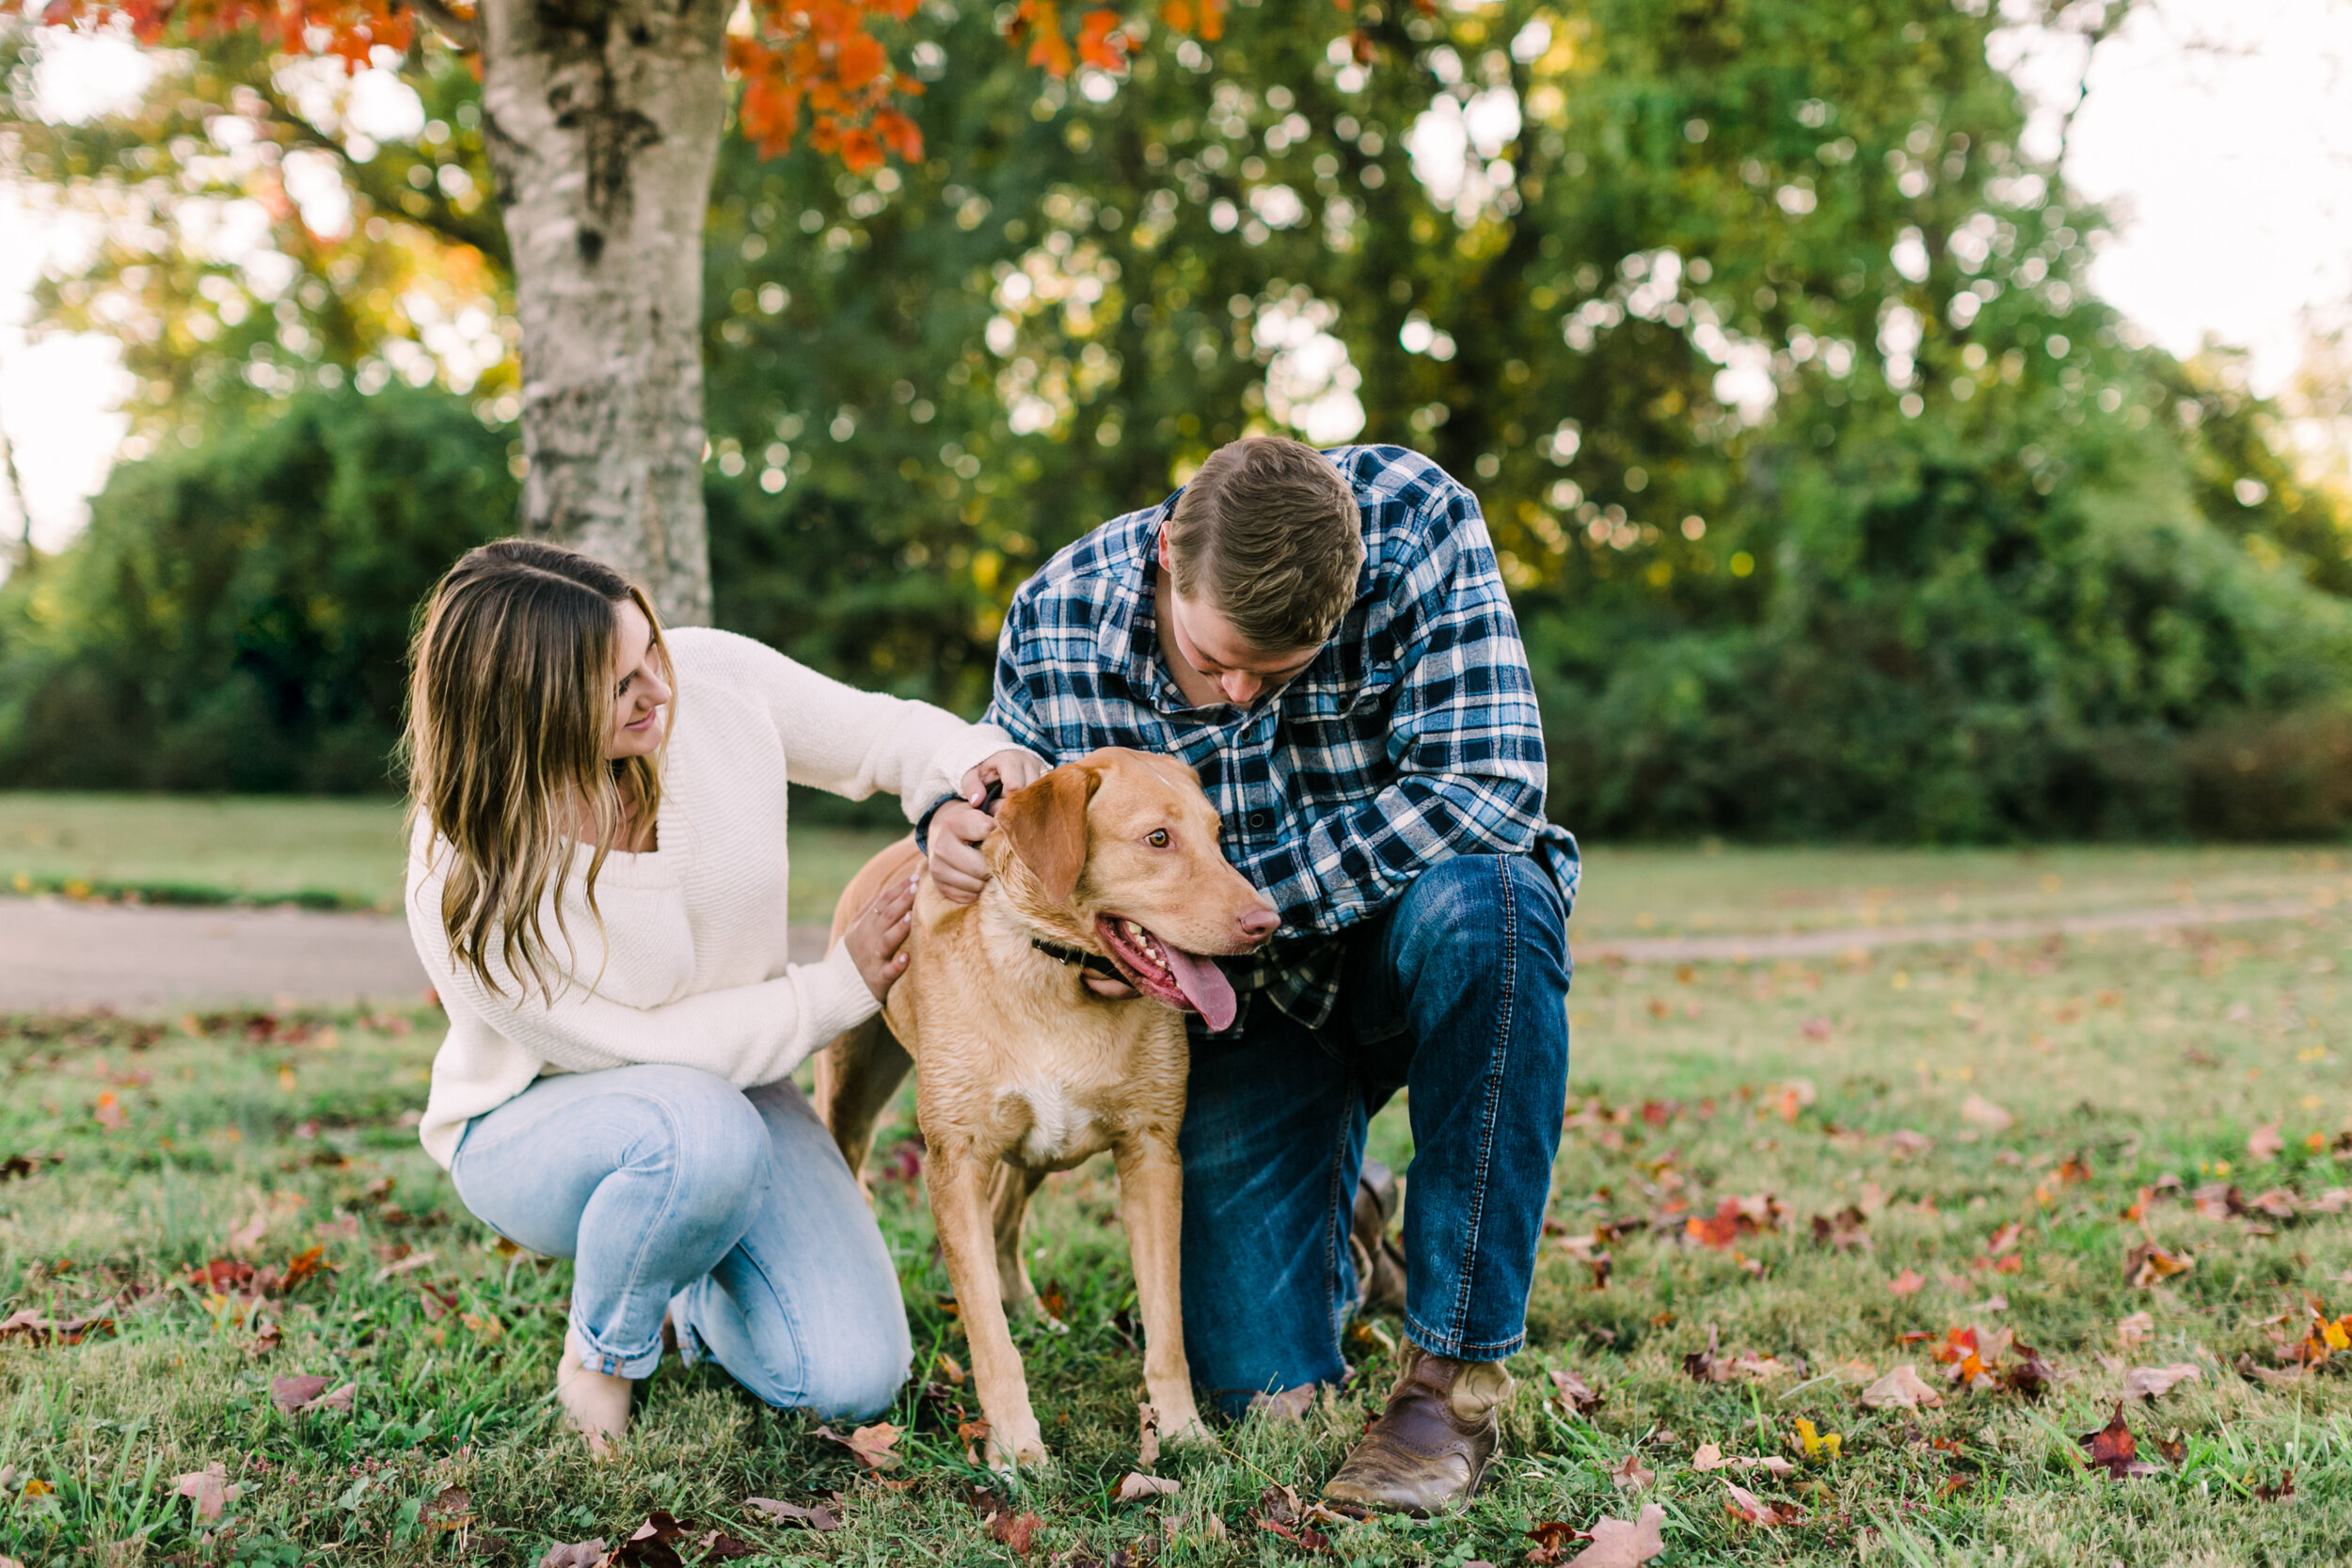 Tennessee+Fall+Engagement+Photos+Puppy (15 of 63).jpg